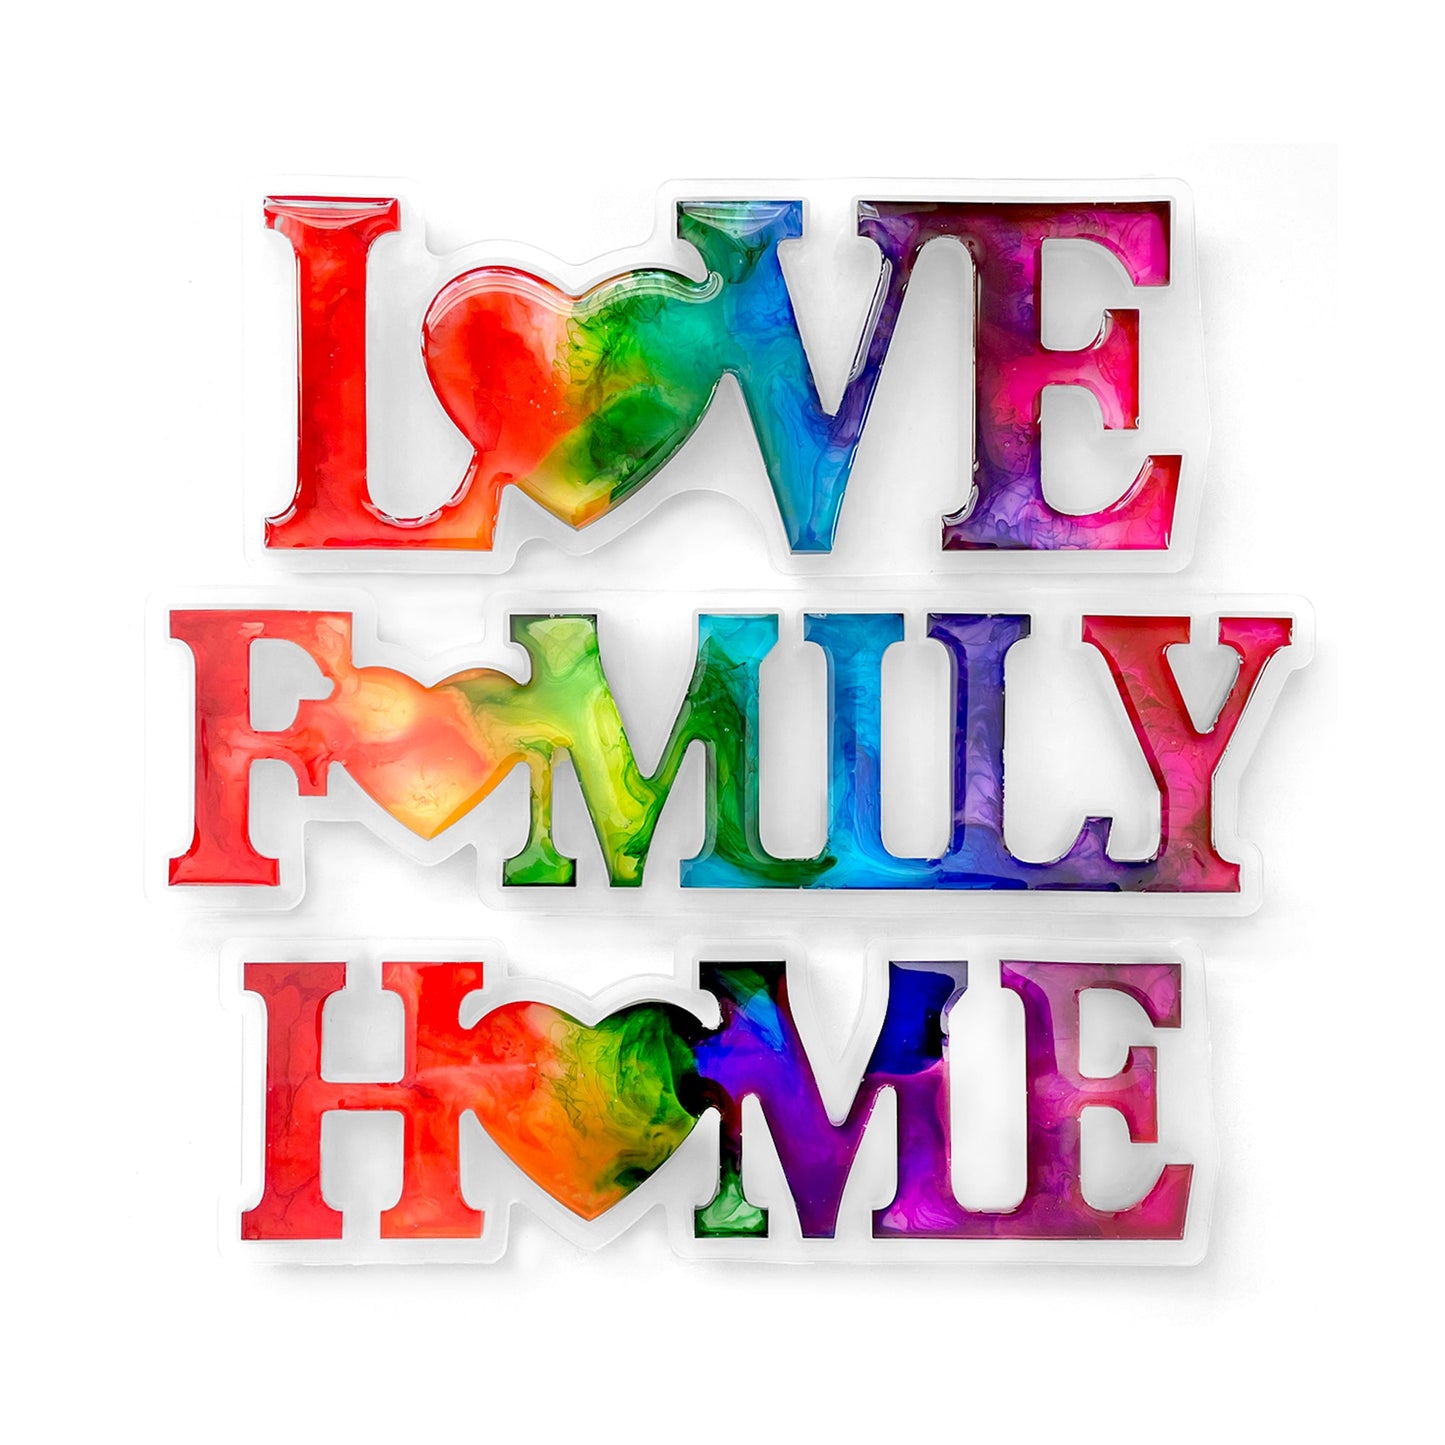 PIXISS Love | Family | Home Mold Set of 3 by Pixiss